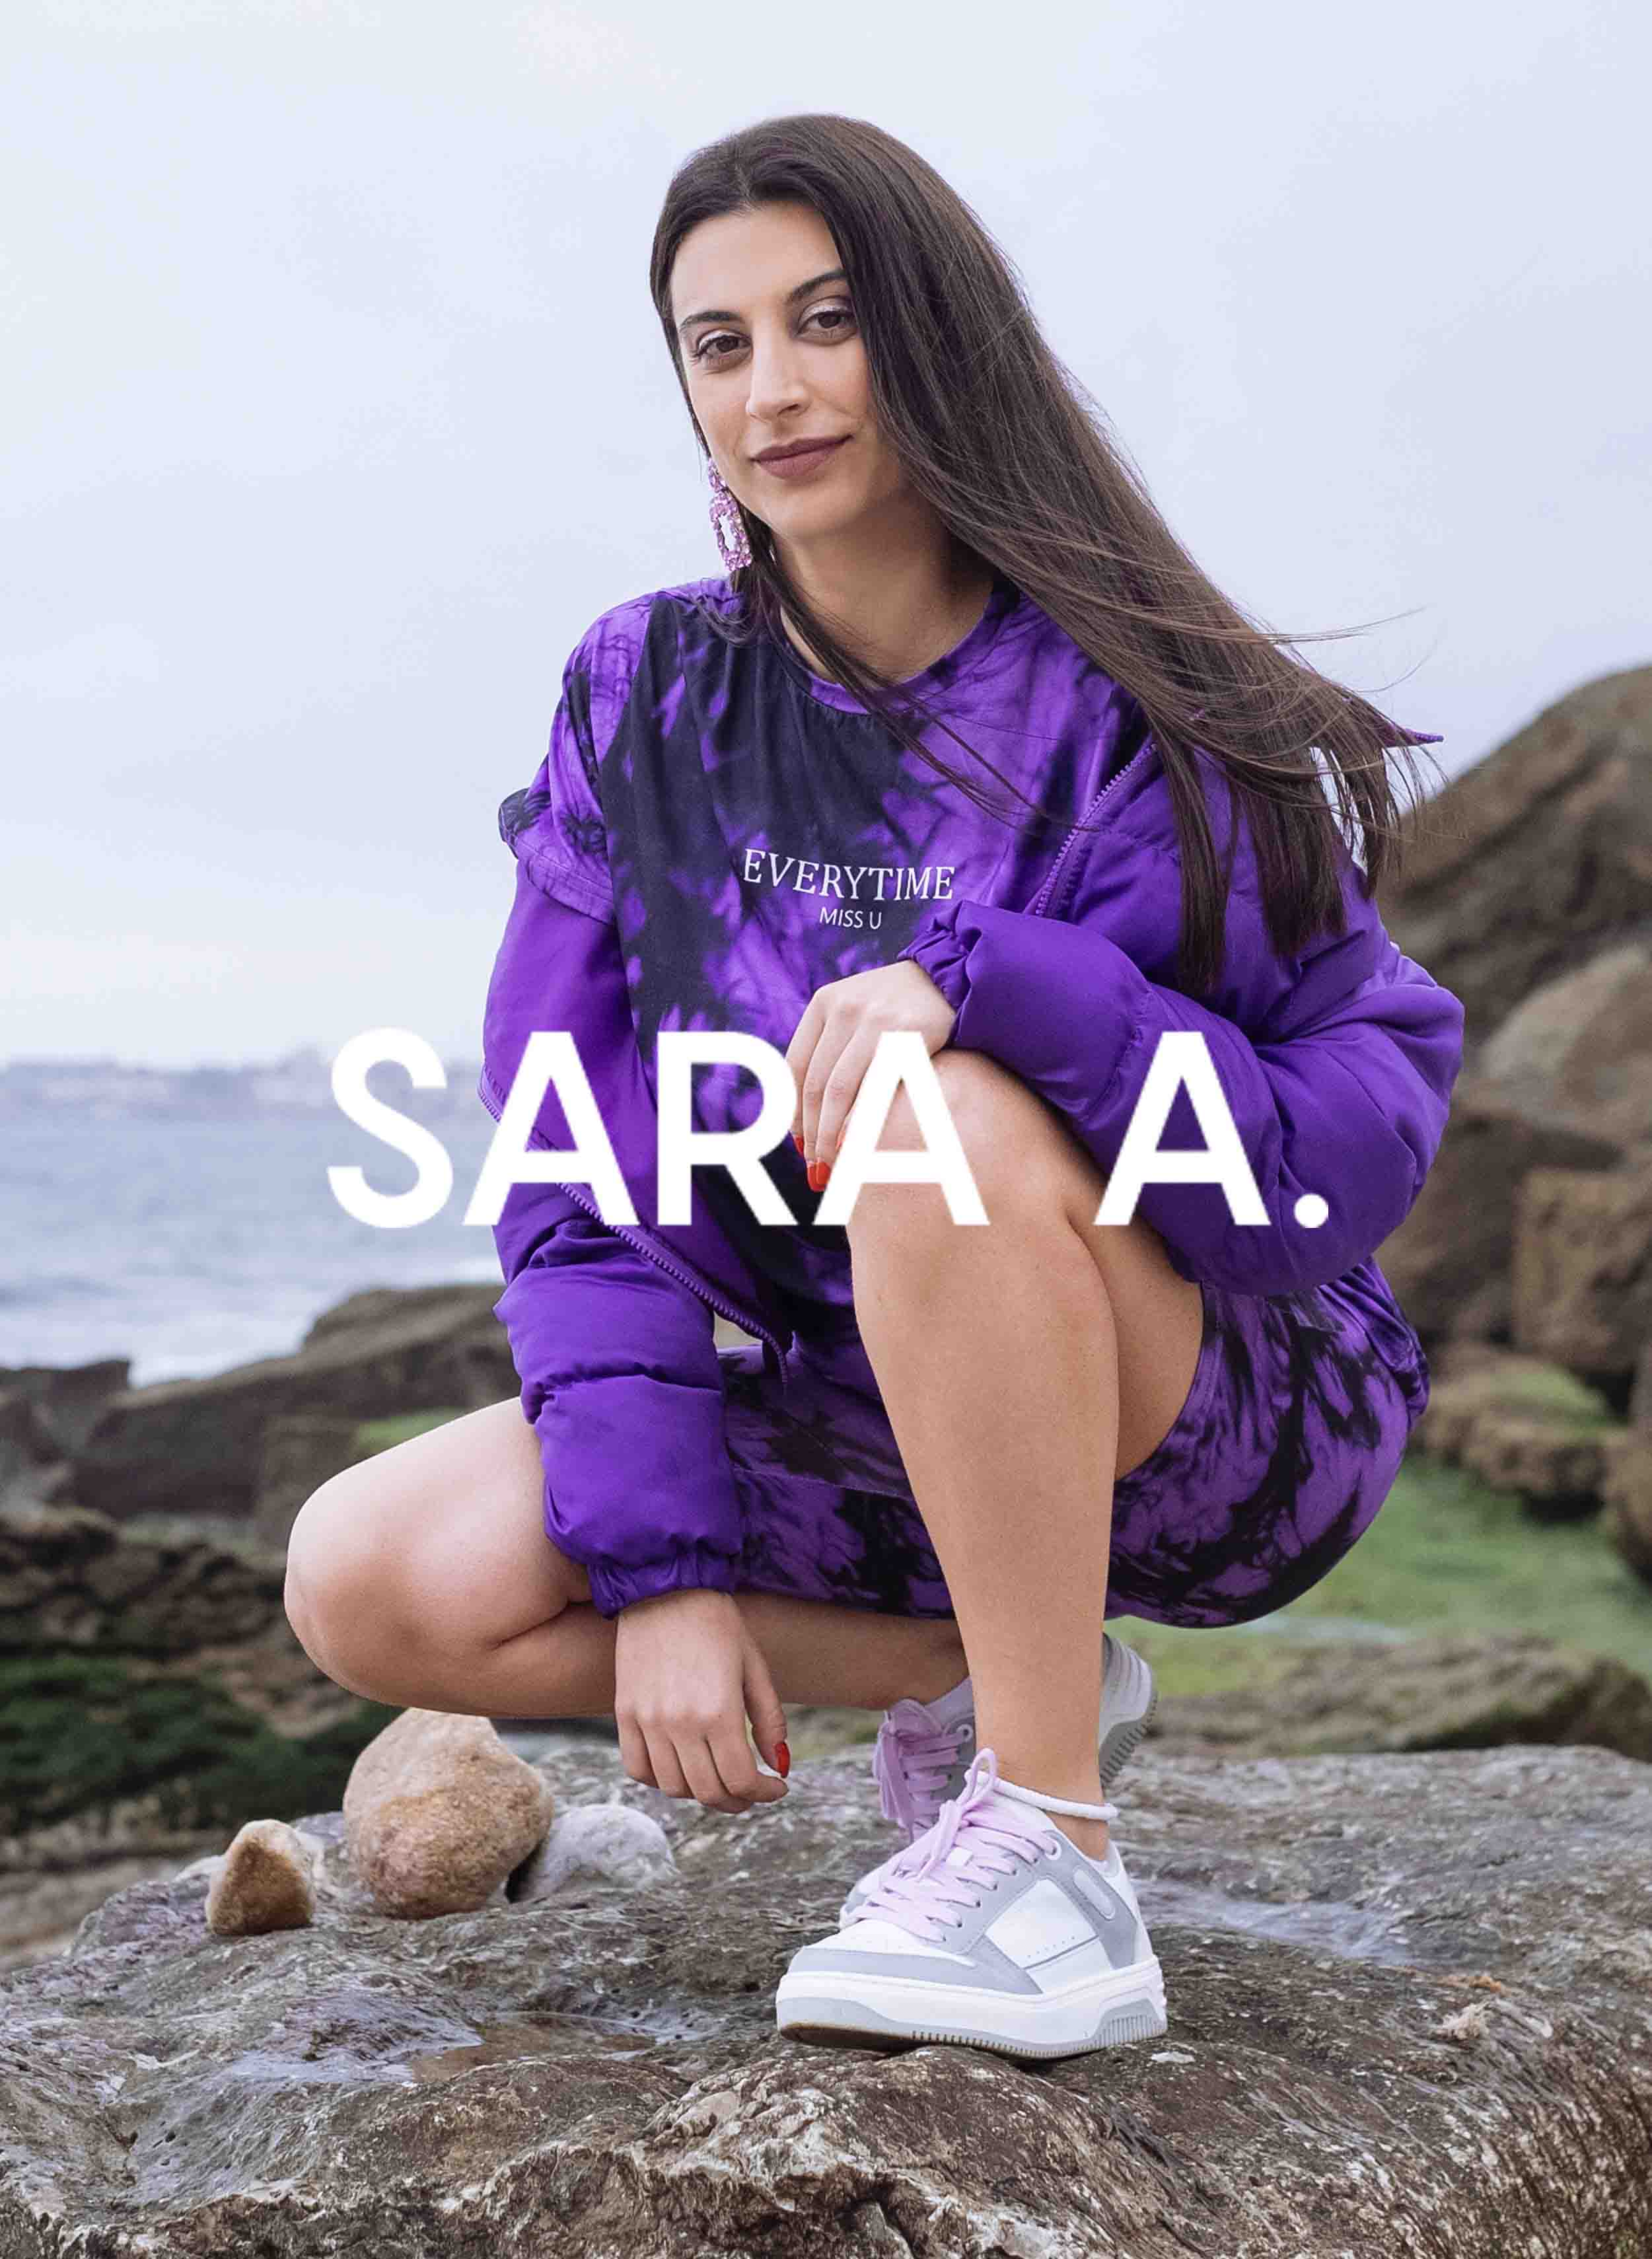 Sara wearing a purple shirt, paired with Diverge sneakers, showing her custom shoes and promoting social impact throught the imagine project.